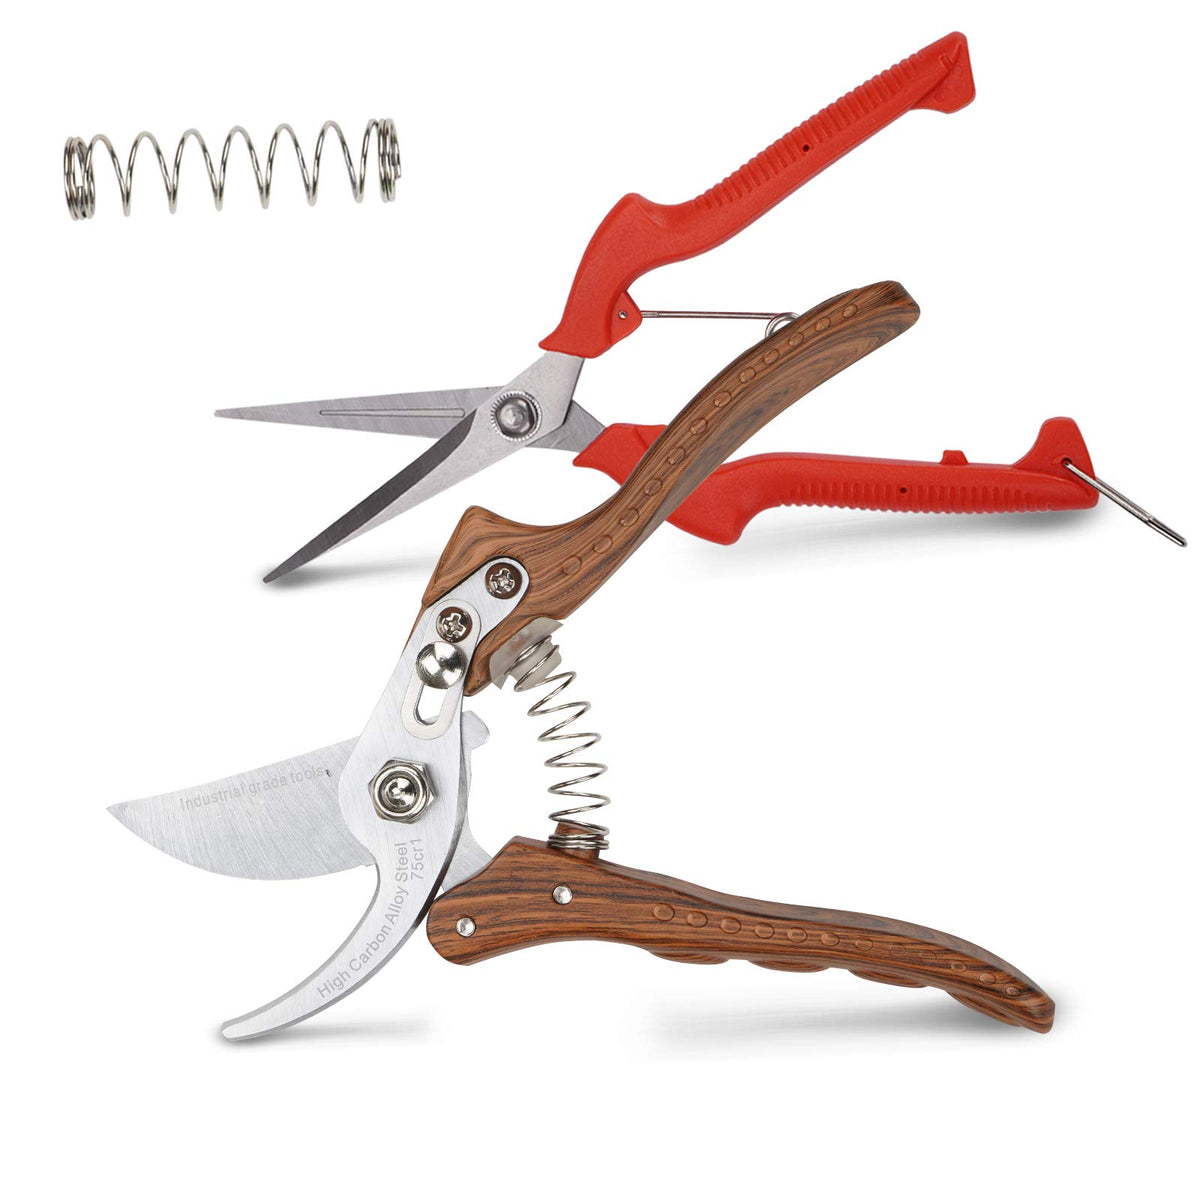 8.6 Gardening Shears, Professional Bypass Pruner Hand Shears, Tree  Trimmers Secateurs, Hedge & Garden Shears, Clippers for Plants, Gardening